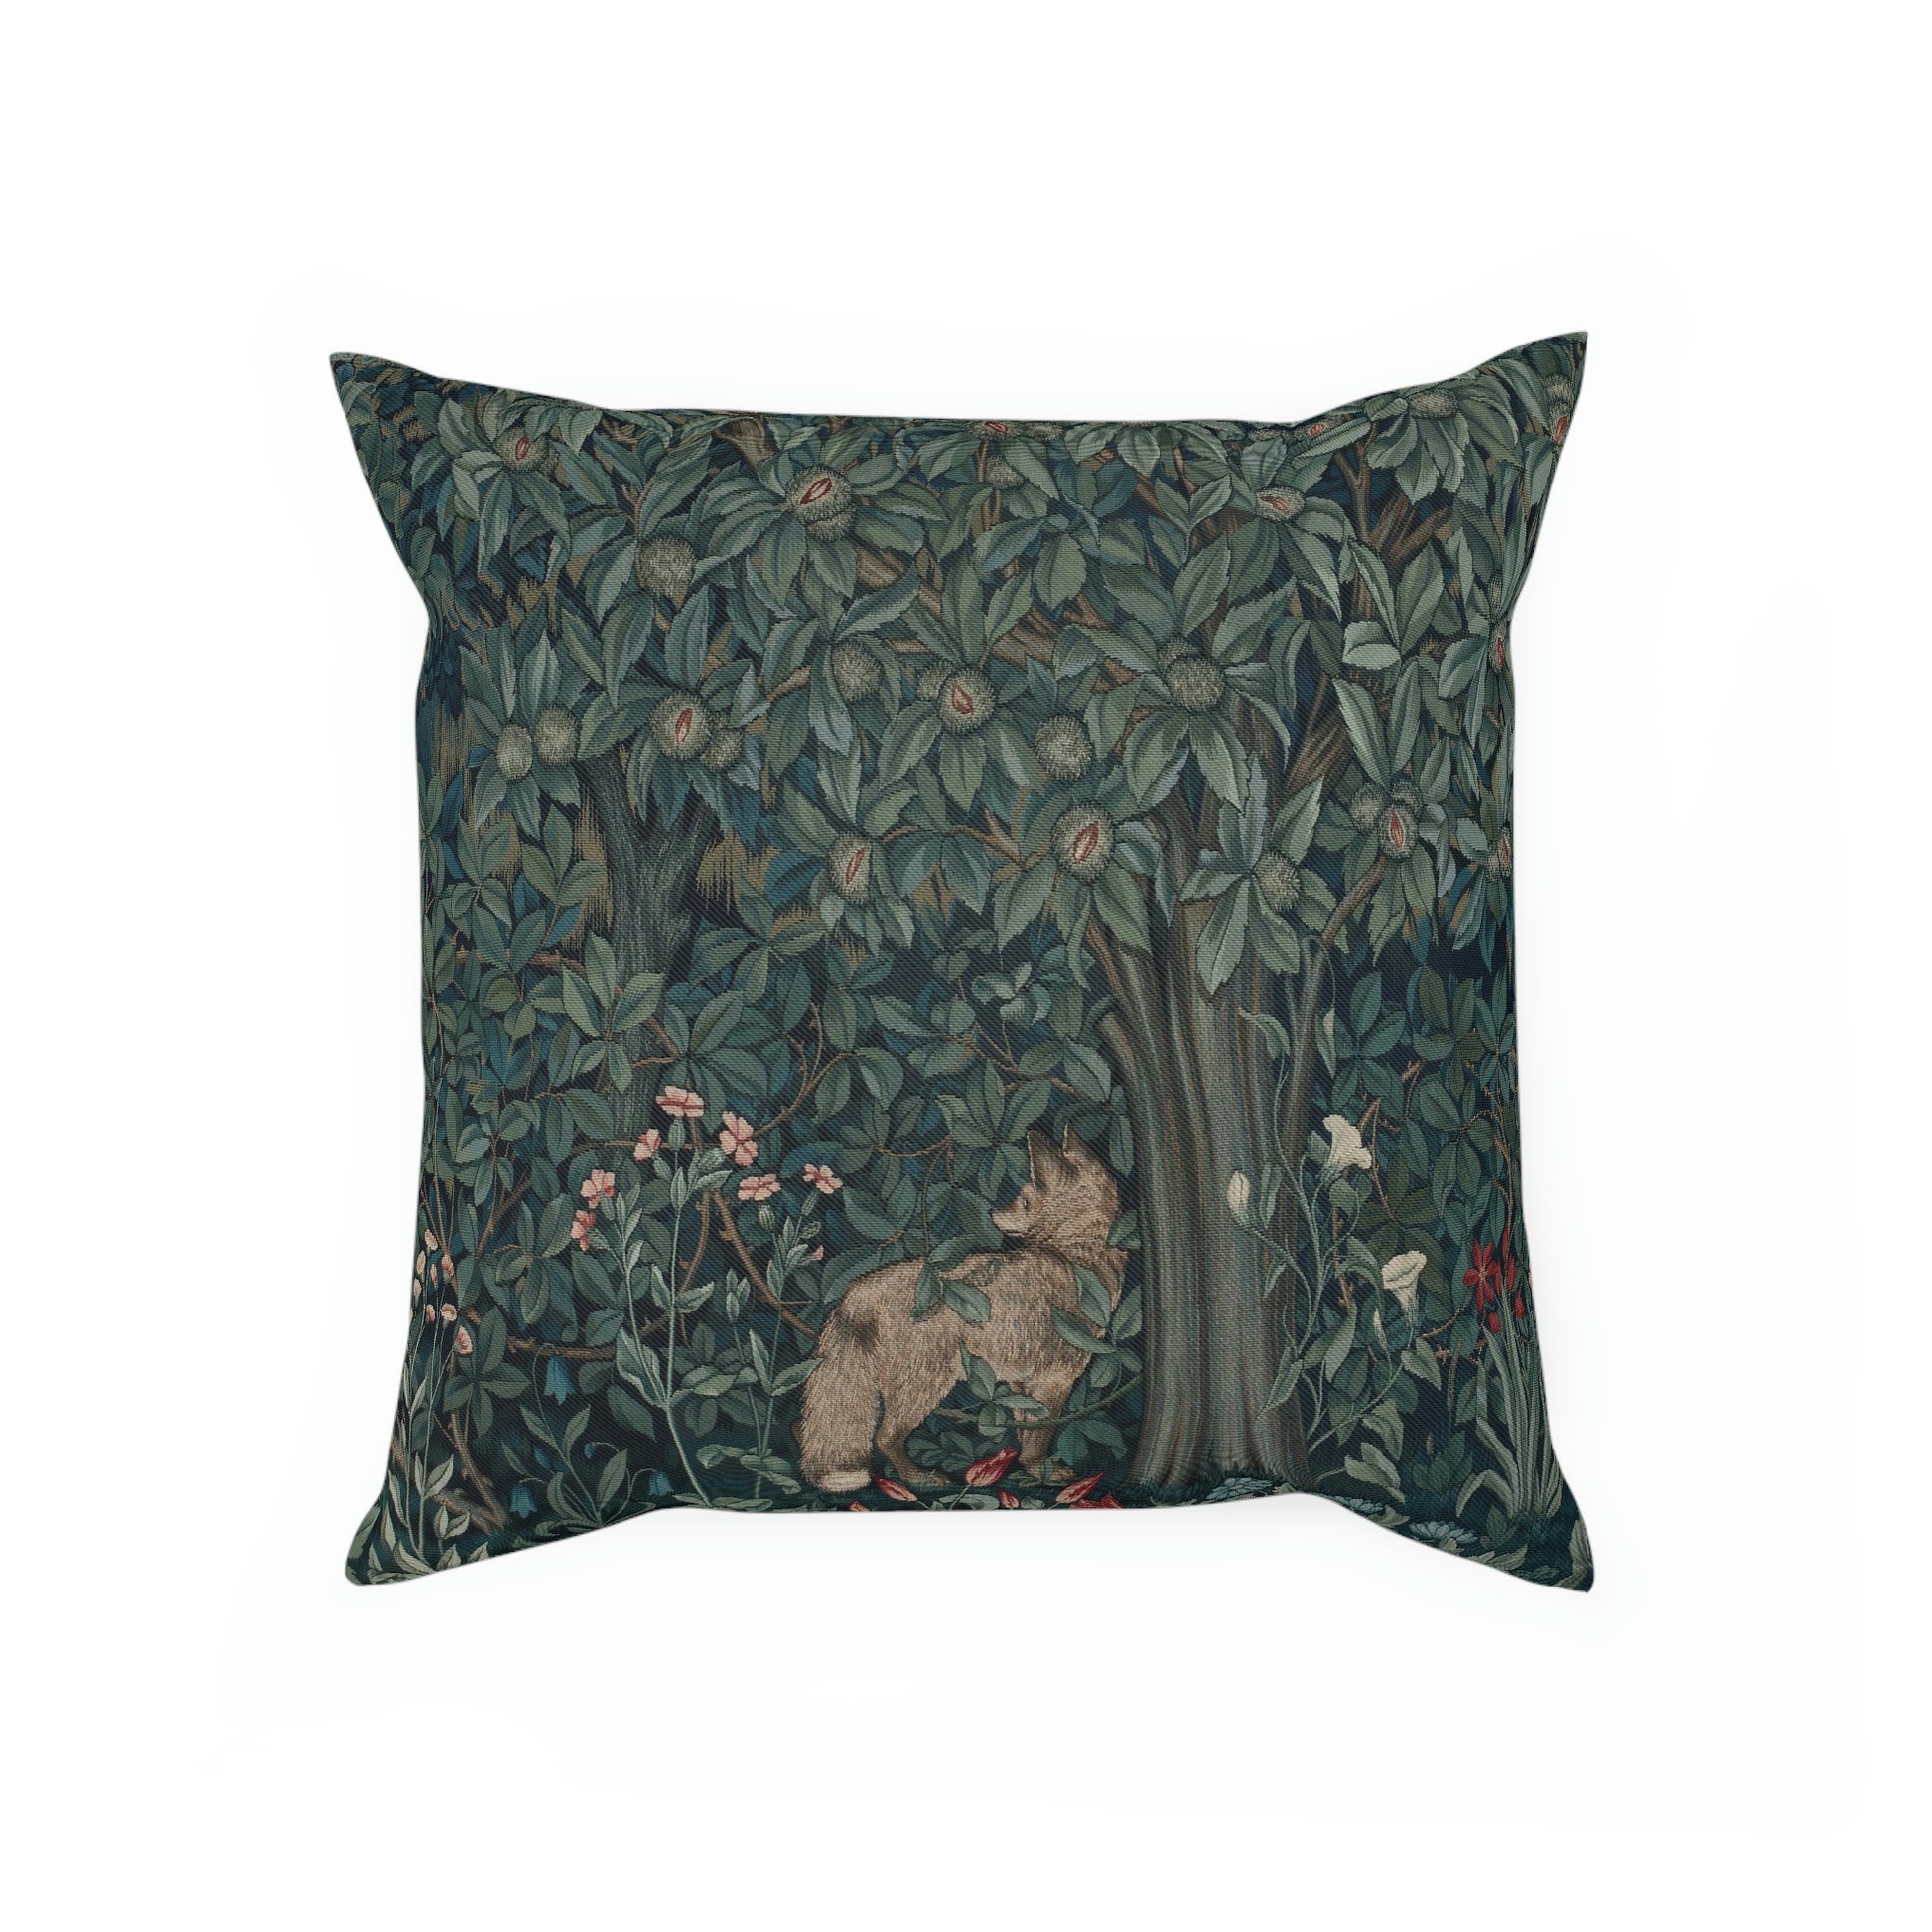 William-Morris-and-Co-Cushion-and-Cushion-Cover-Fox-by-John-Henry-Dearle-Green-Forest-Collection-6